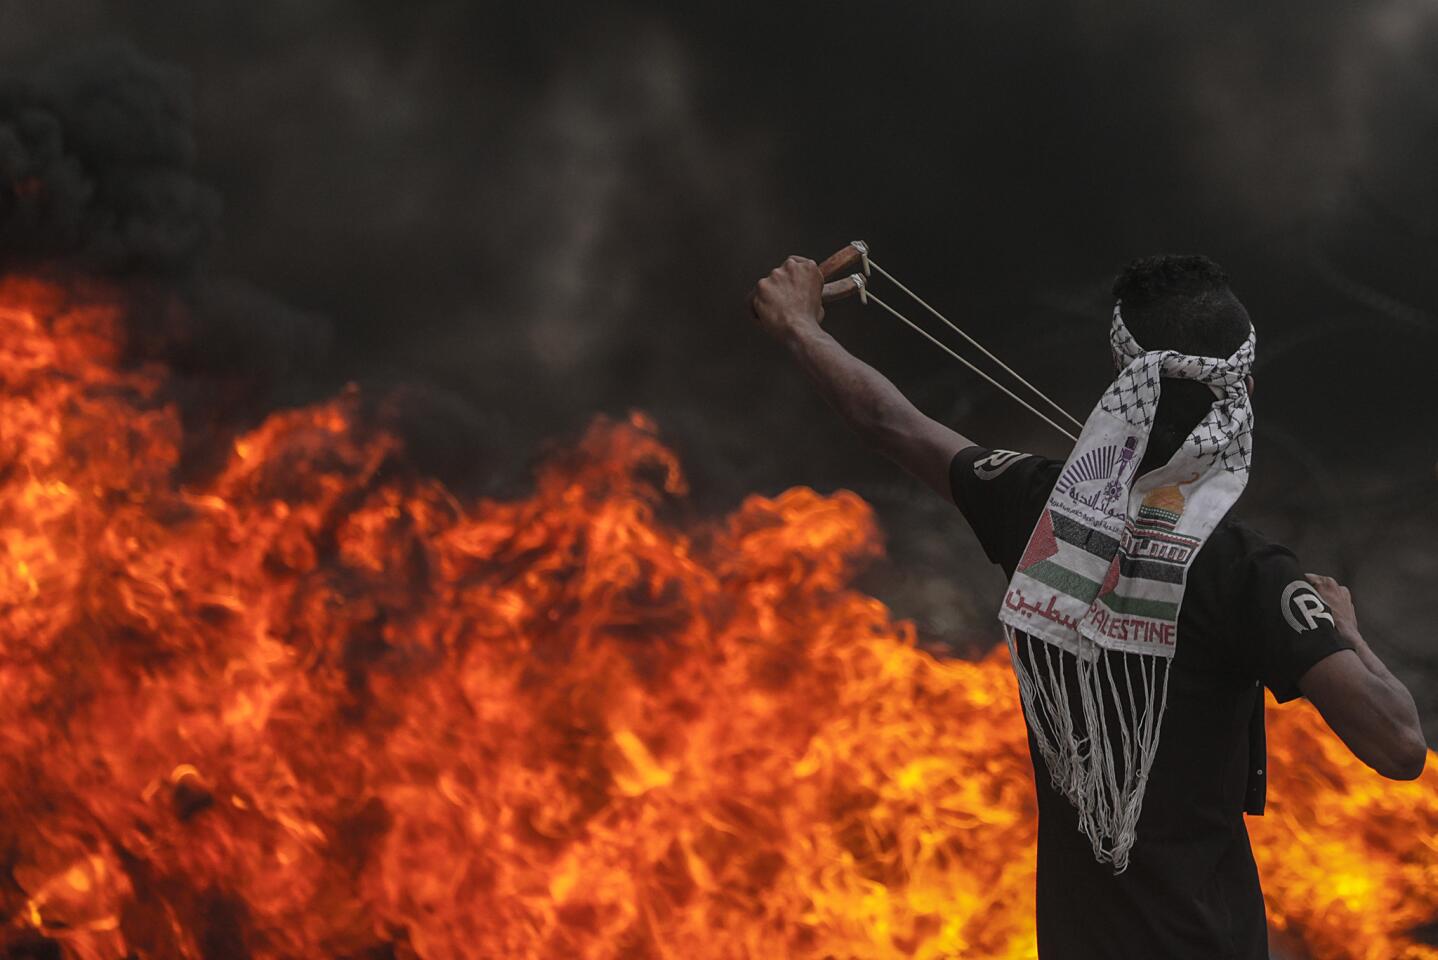 A Palestinian protester throws stones with a slingshot during clahses after protests near the border with Israel in Gaza City on May 4, 2018.